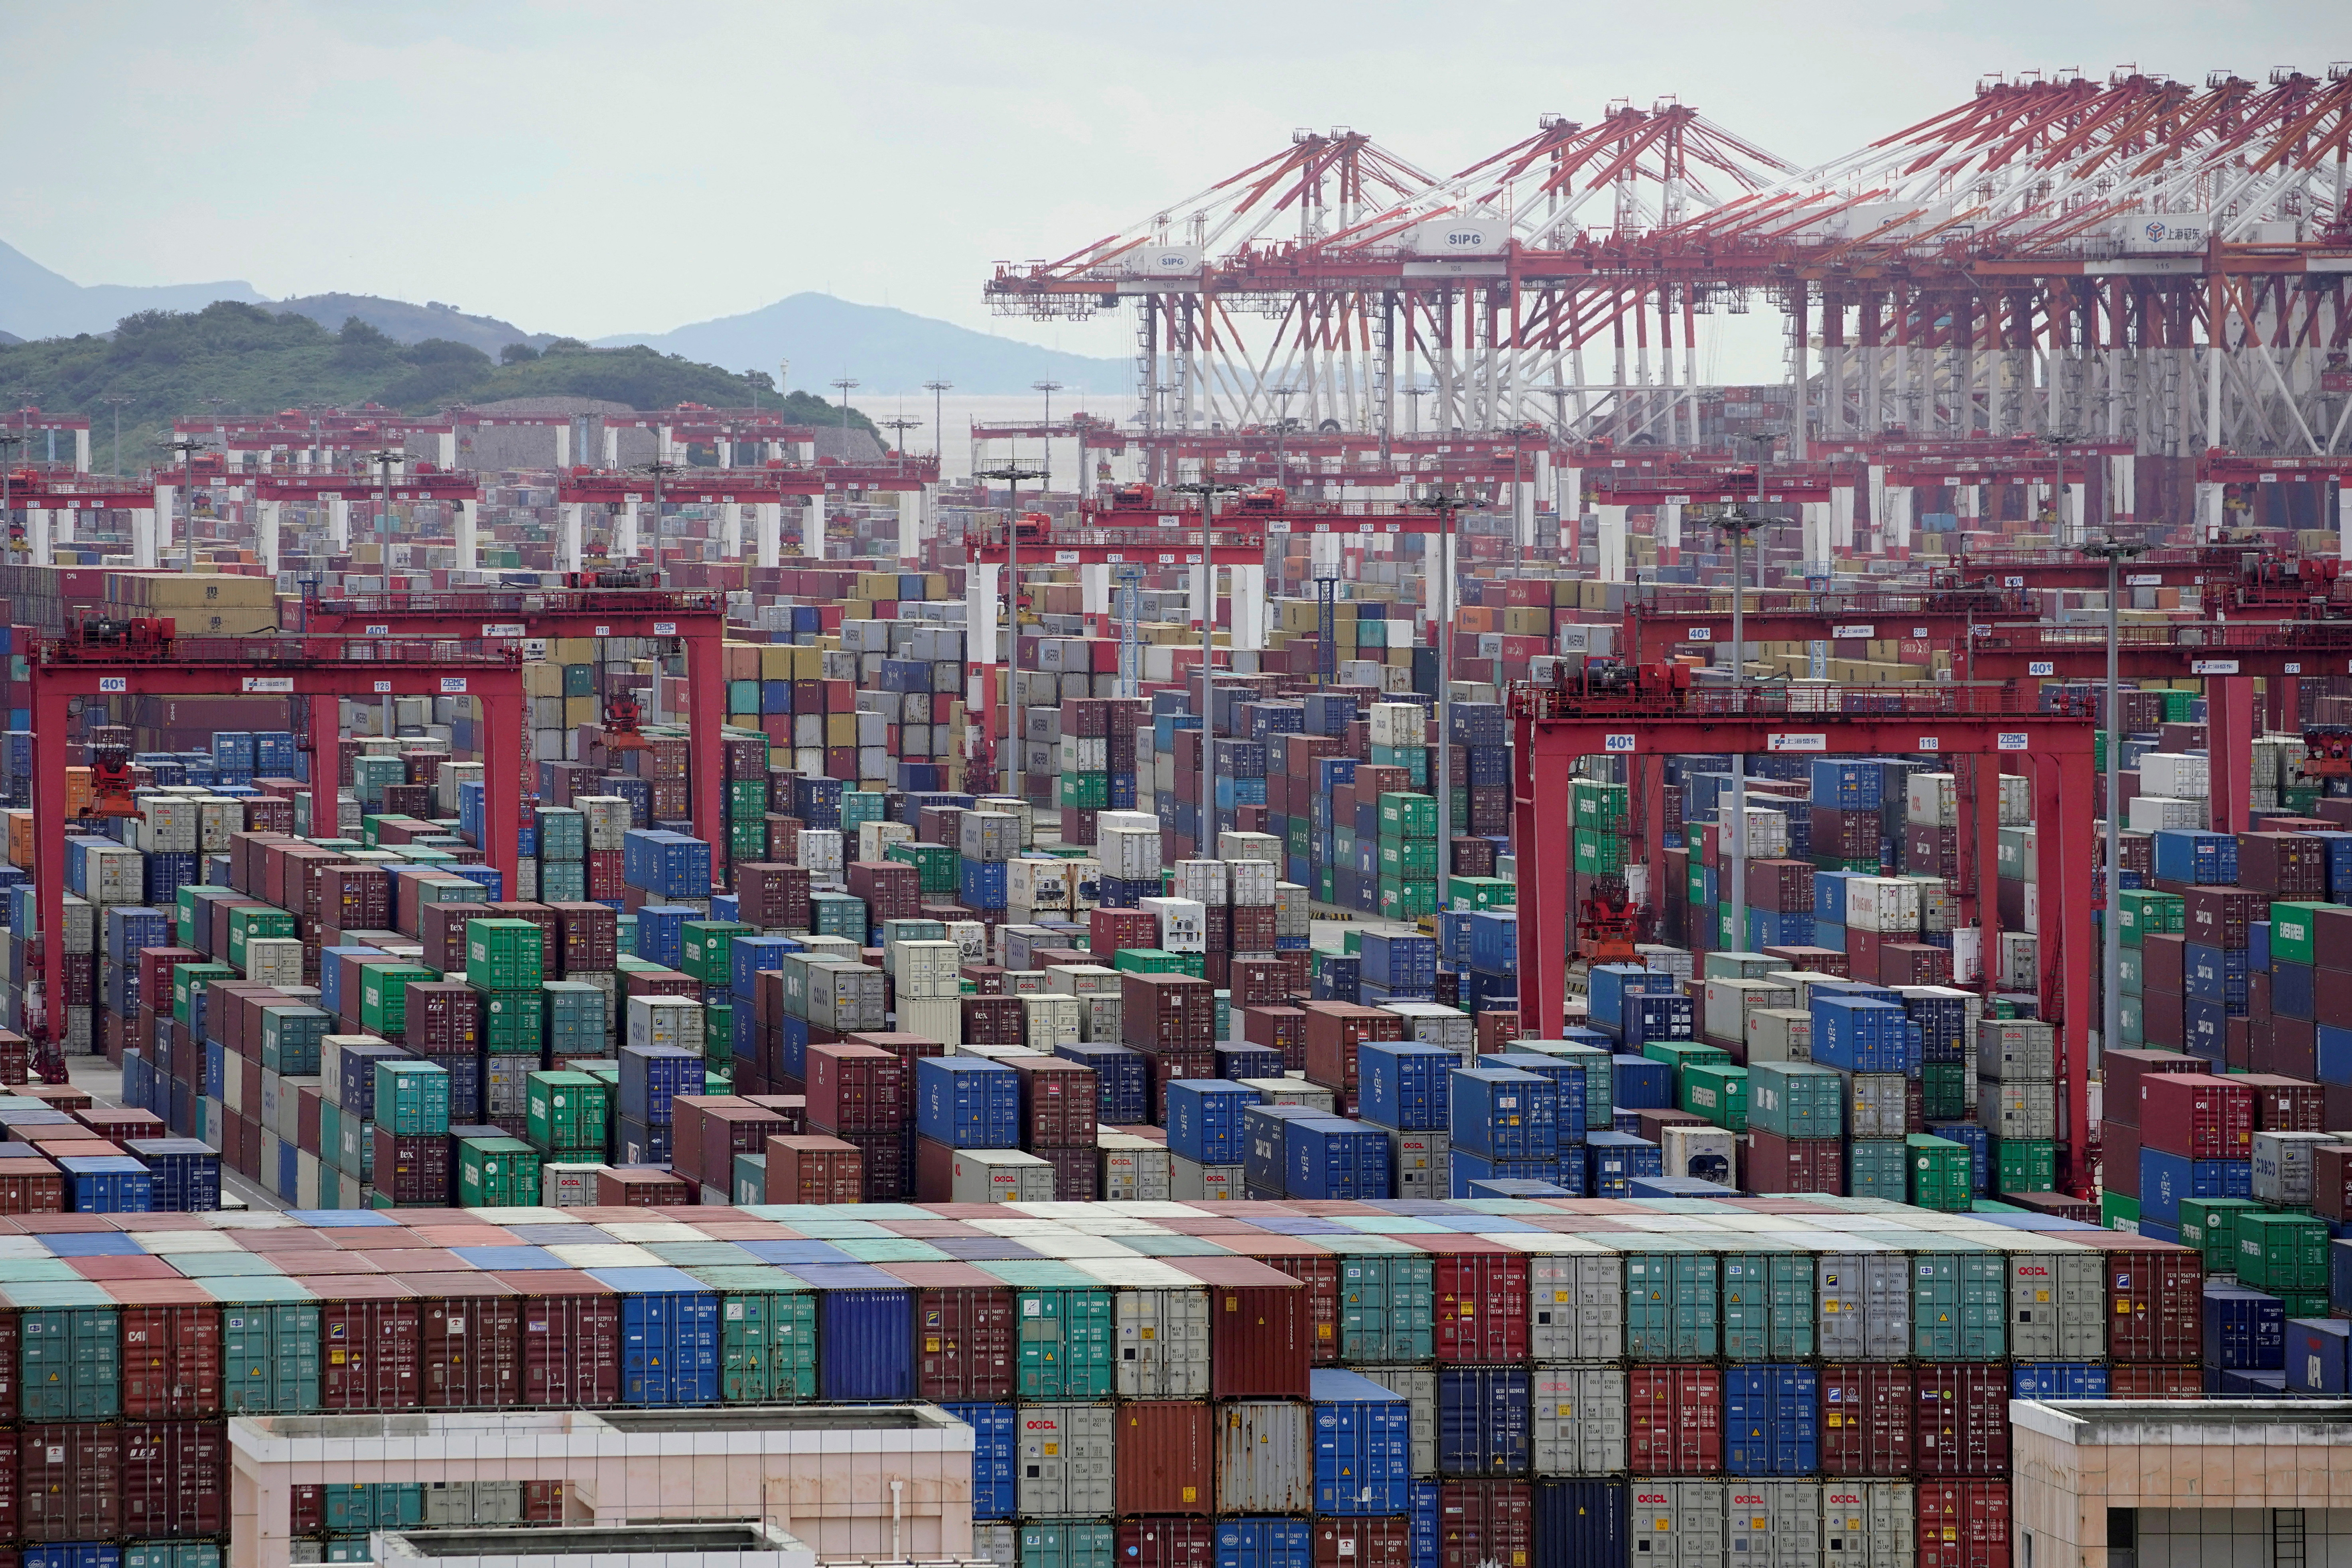 Containers are seen at the Yangshan deep water port in Shanghai